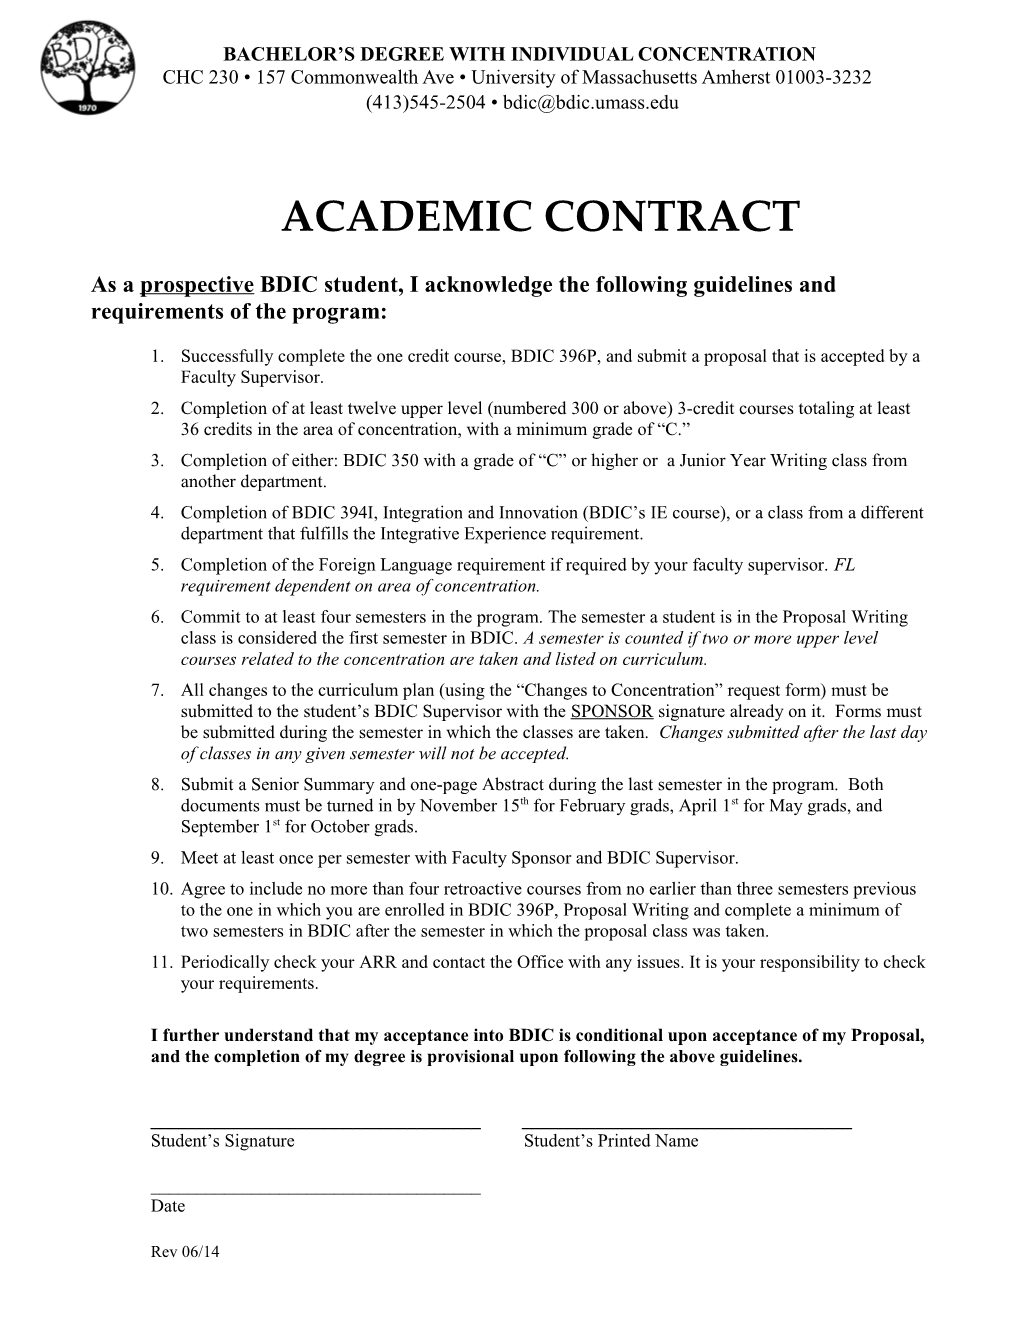 Bachelor S Degree with Individual Concentration Academic Contract